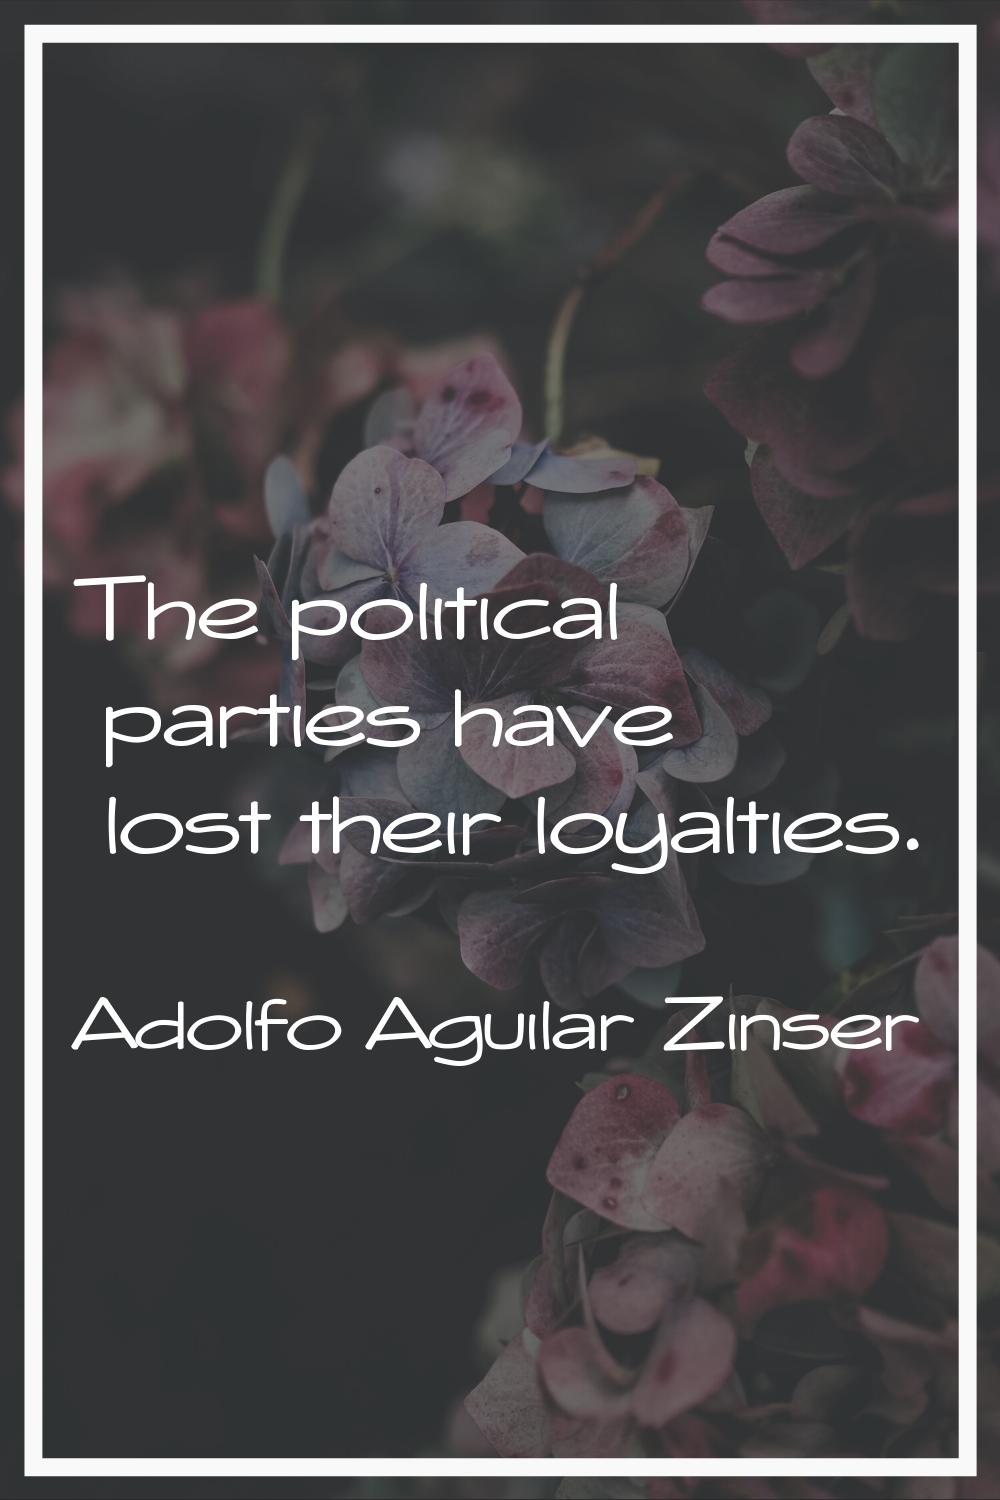 The political parties have lost their loyalties.